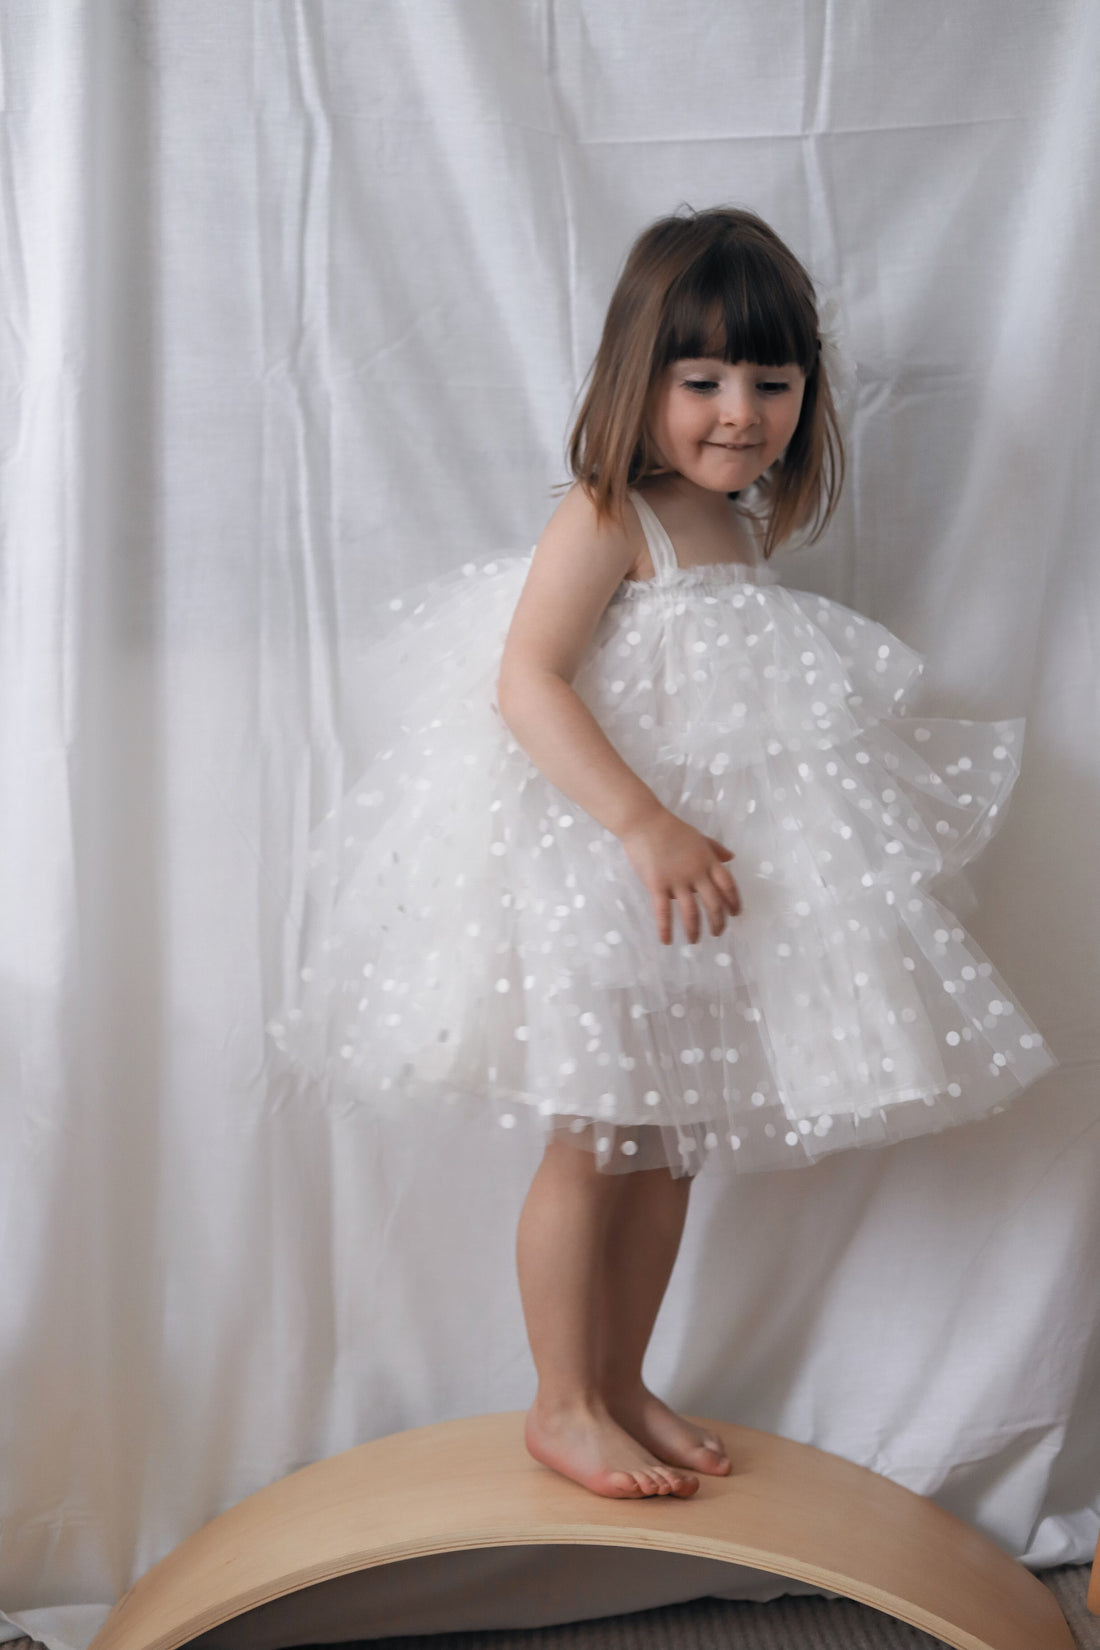 The Party Dress - WHITE POLKA DOTS